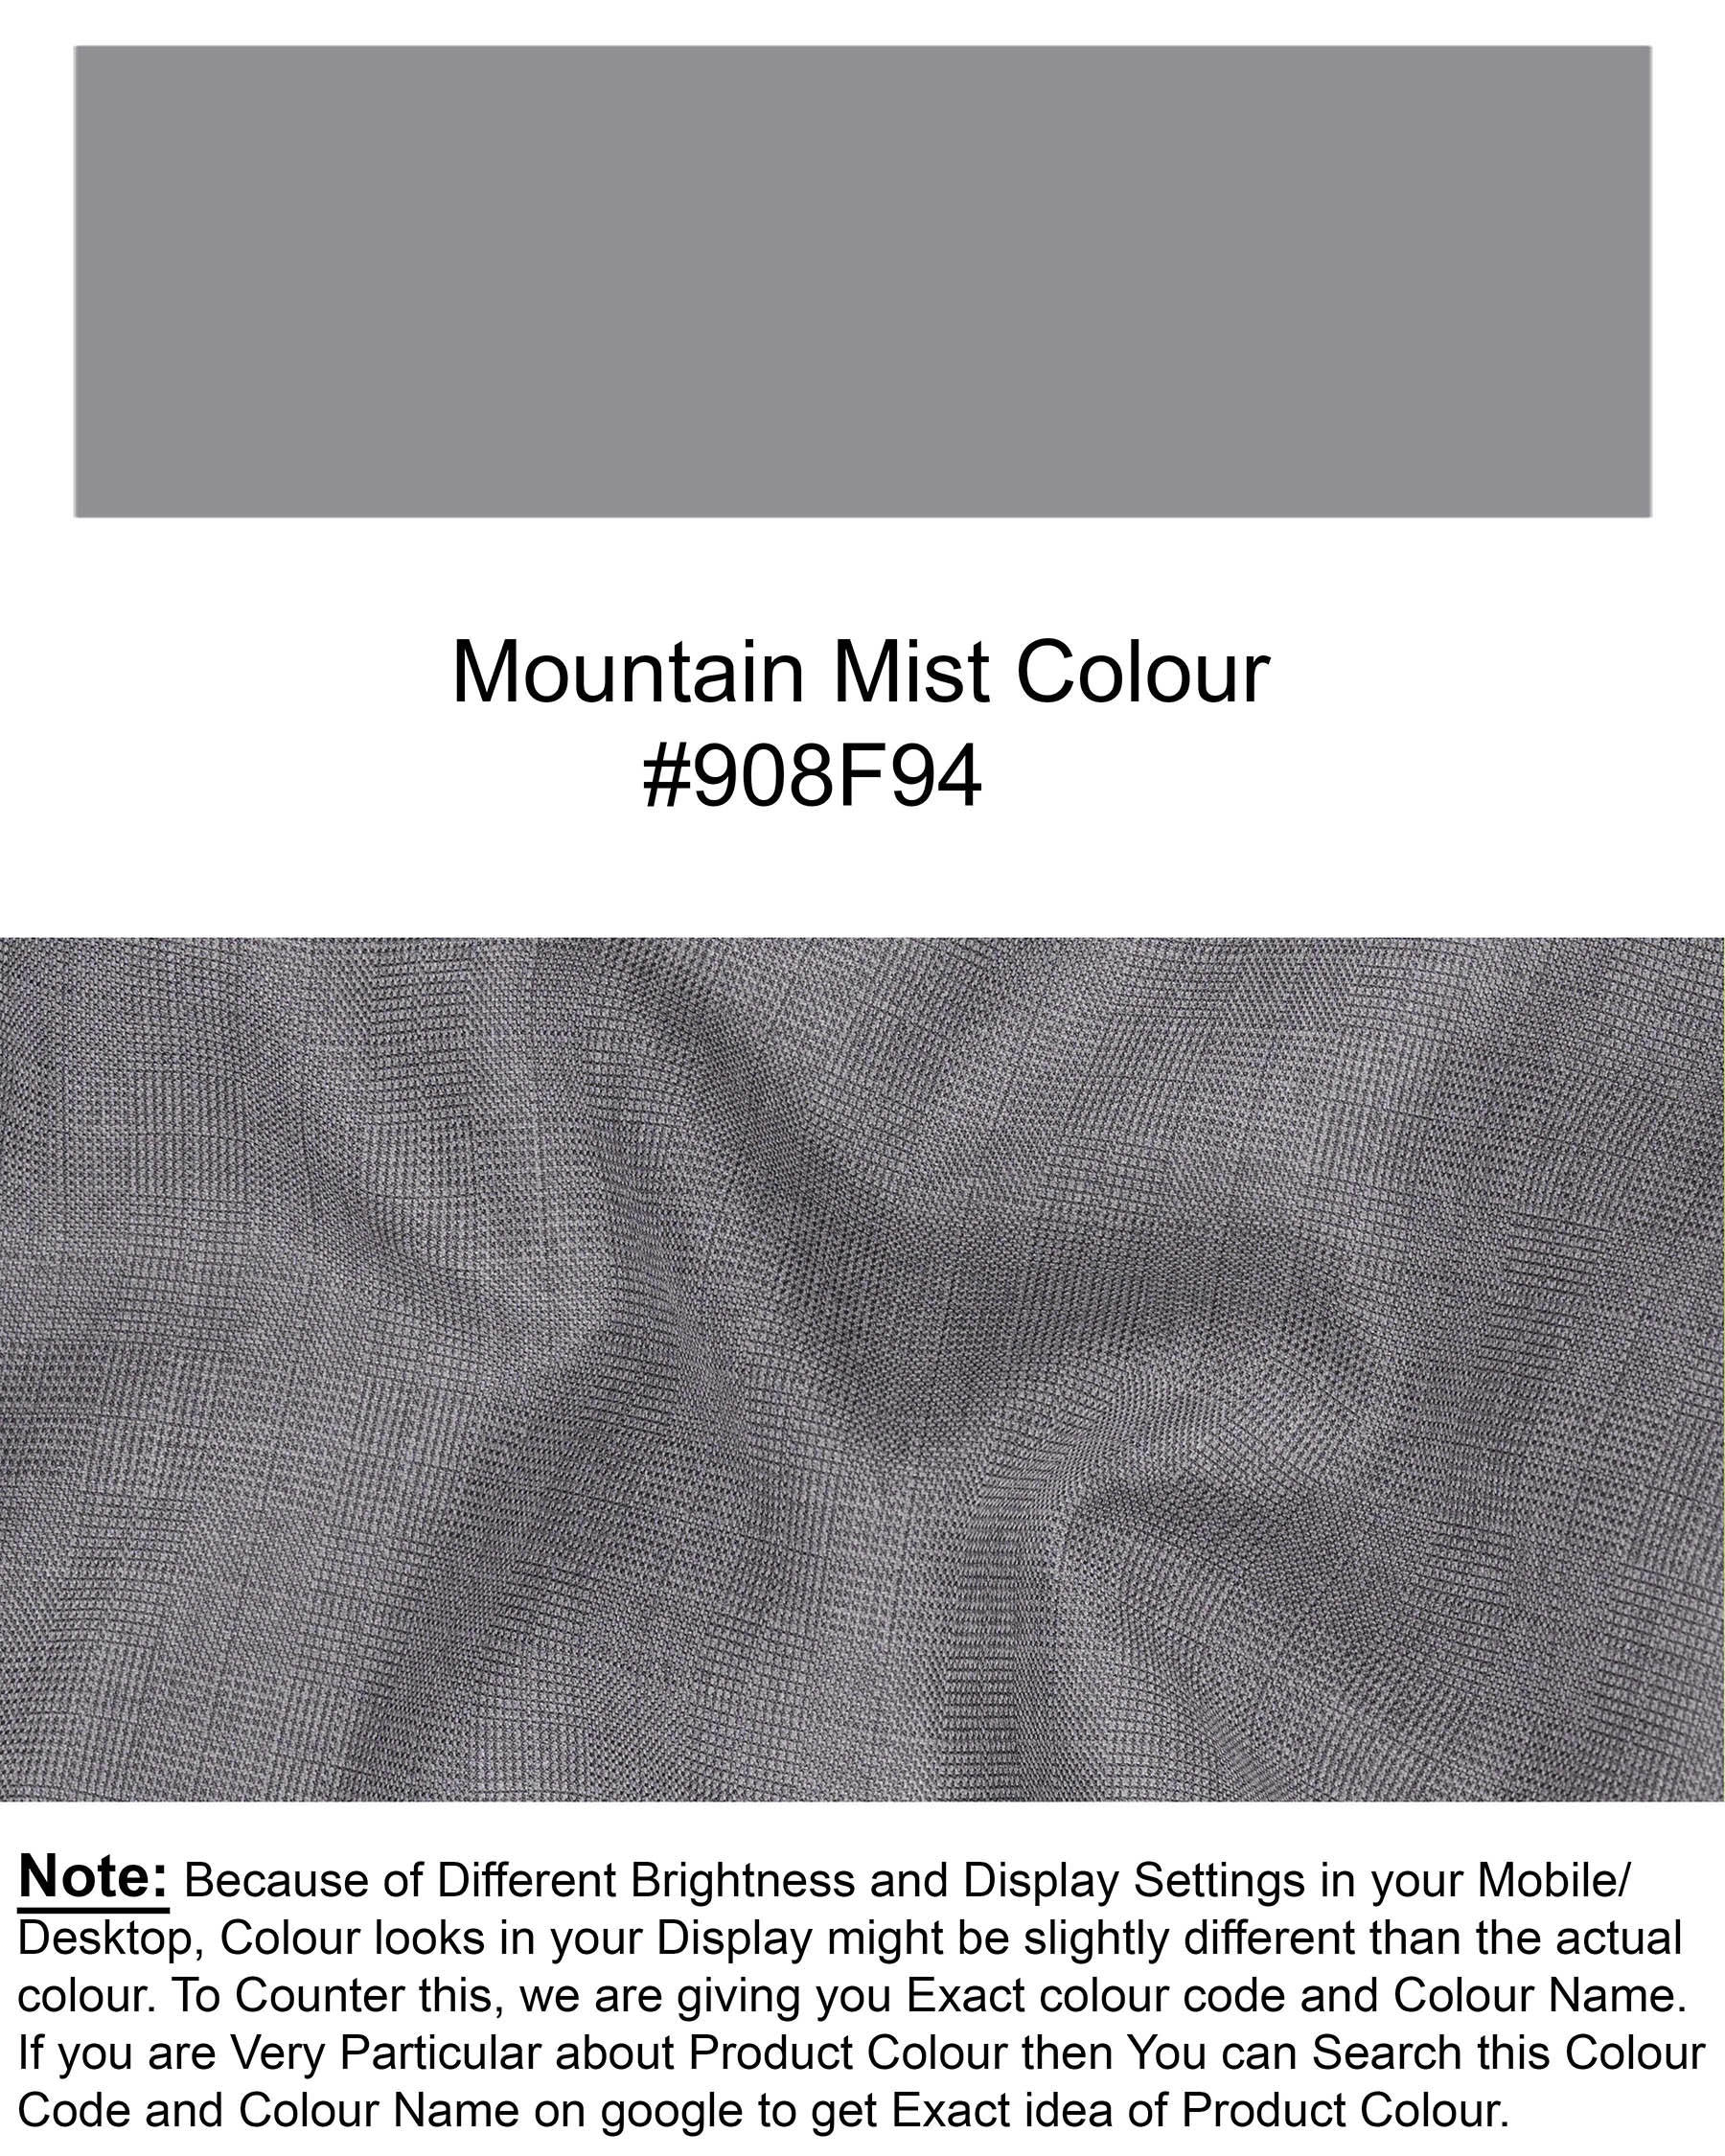 Mountain Mist Gray Double Breasted Blazer BL1832-DB-36, BL1832-DB-38, BL1832-DB-40, BL1832-DB-42, BL1832-DB-44, BL1832-DB-46, BL1832-DB-48, BL1832-DB-50, BL1832-DB-52, BL1832-DB-54, BL1832-DB-56, BL1832-DB-58, BL1832-DB-60